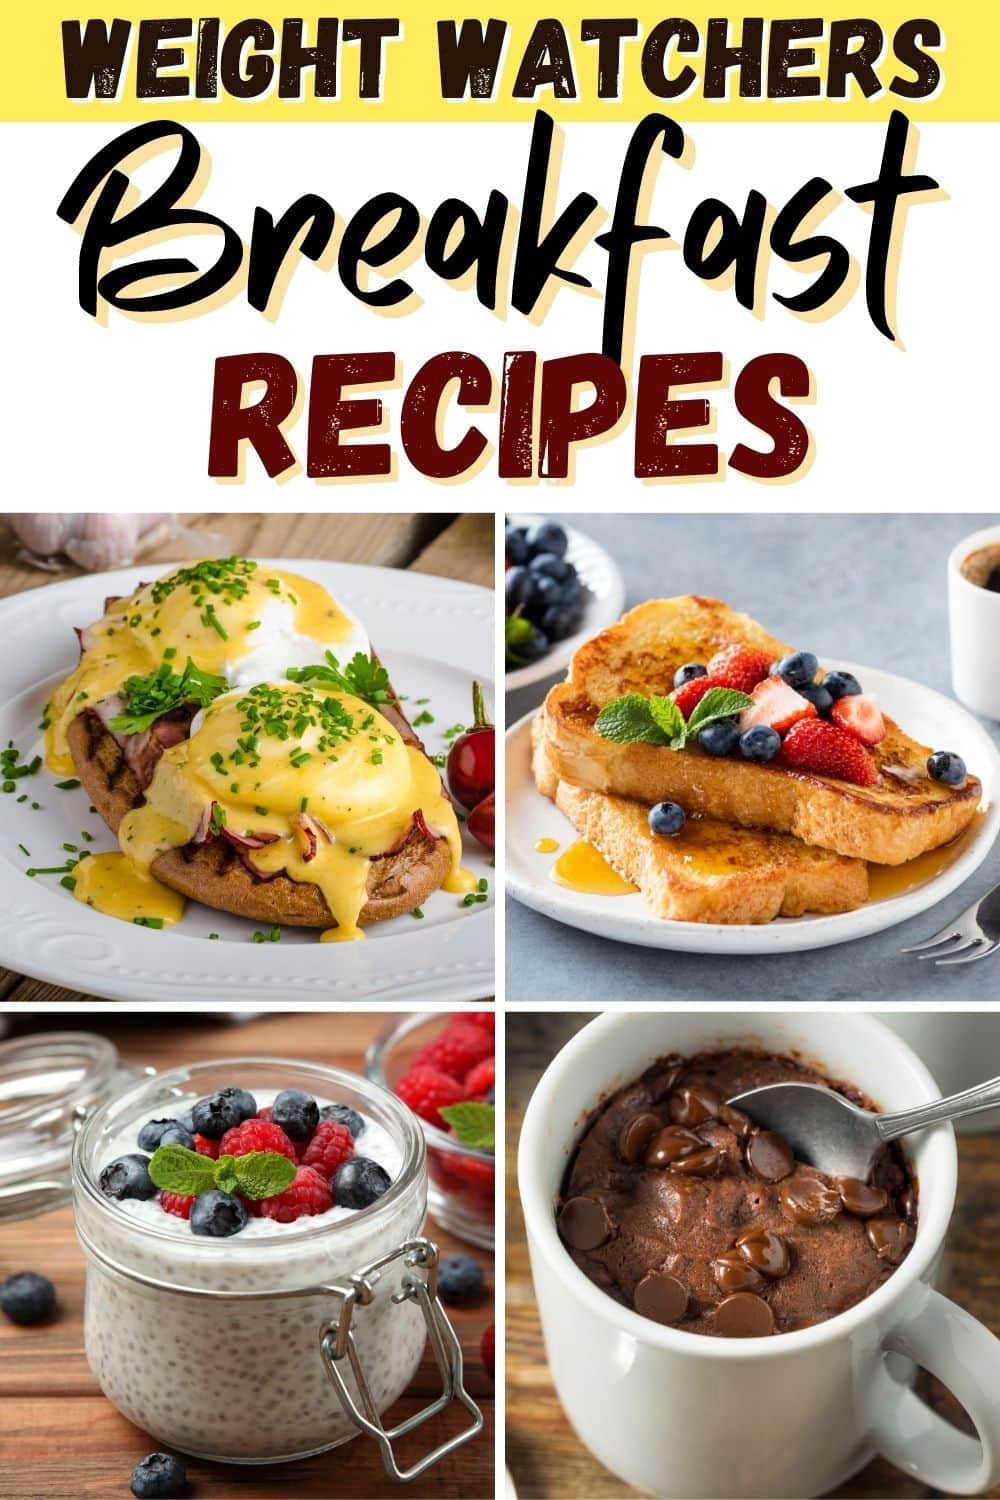 25 Easy Weight Watchers Breakfast Recipes - Insanely Good